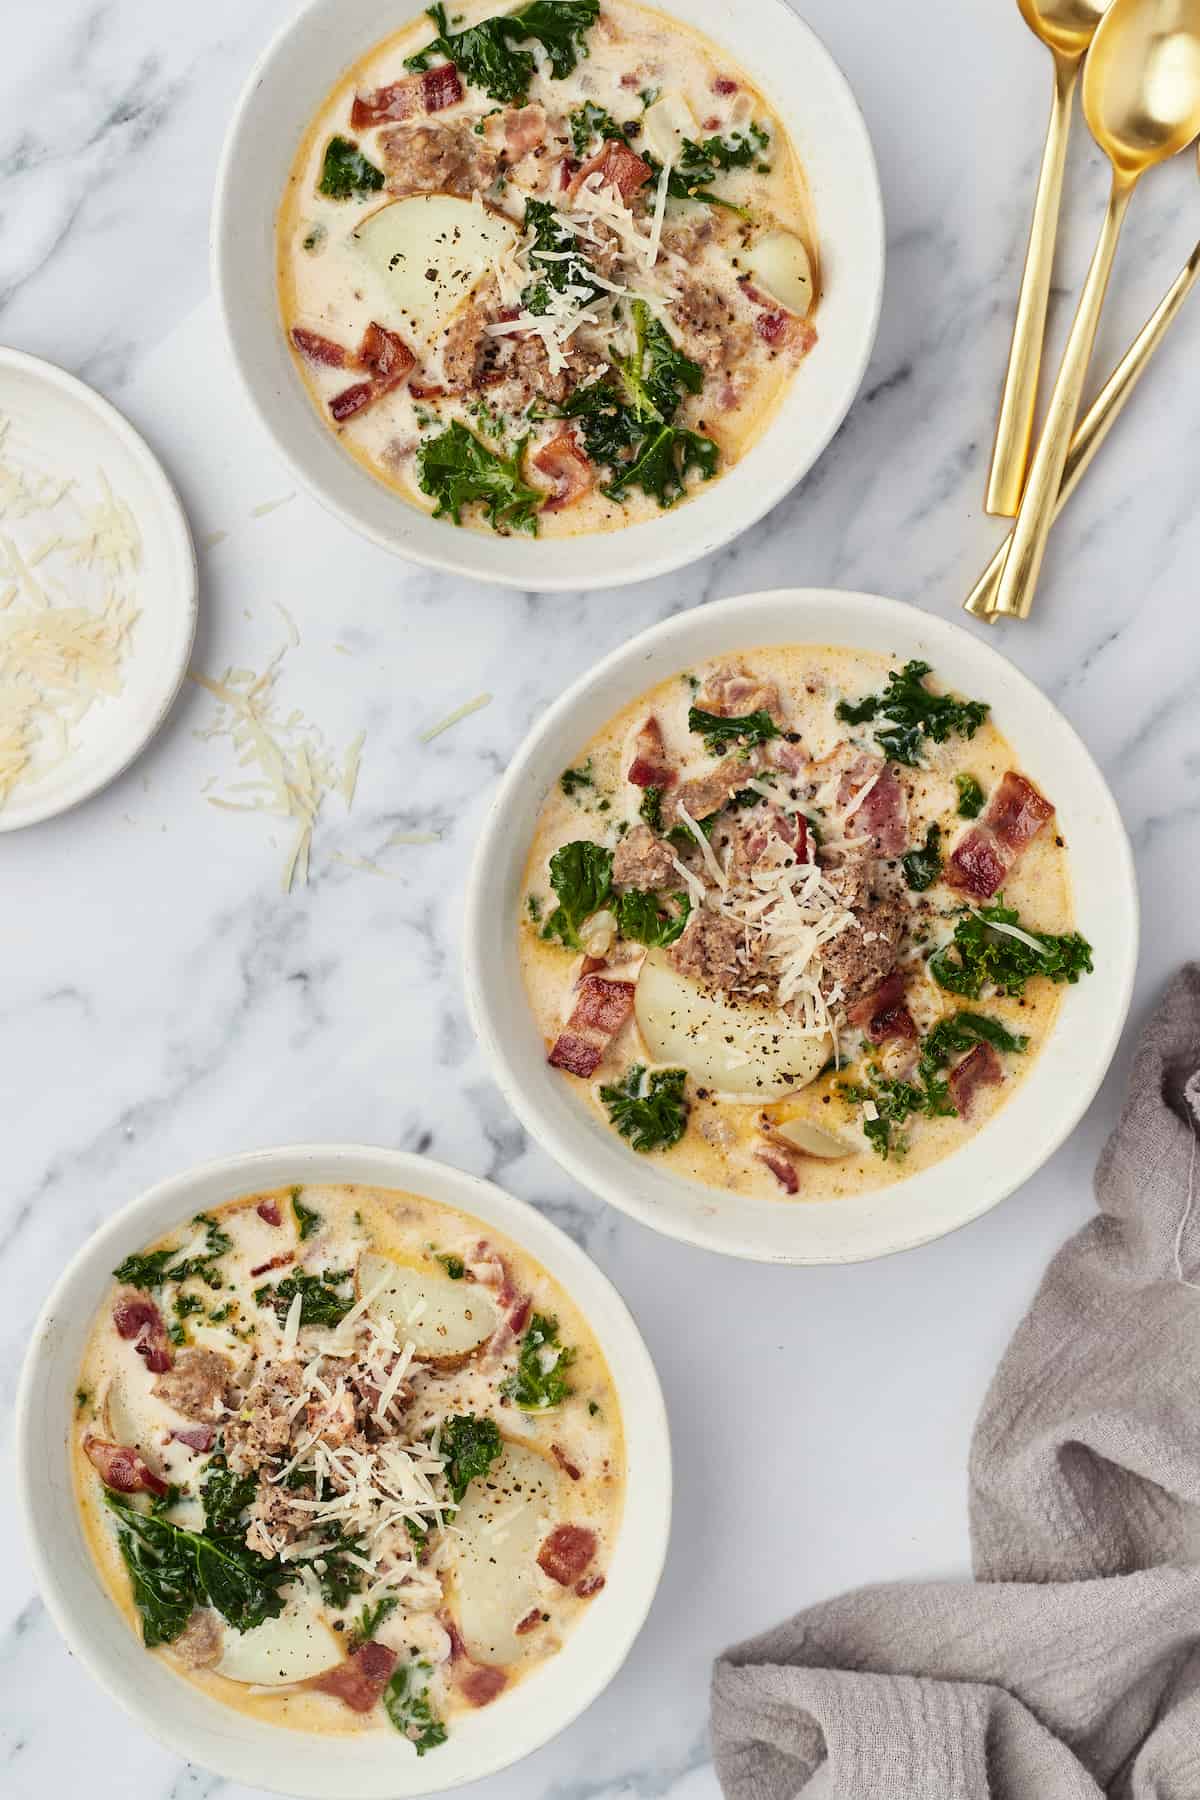 Three servings of Zuppa Toscana in three separate bowls on a marble countertop